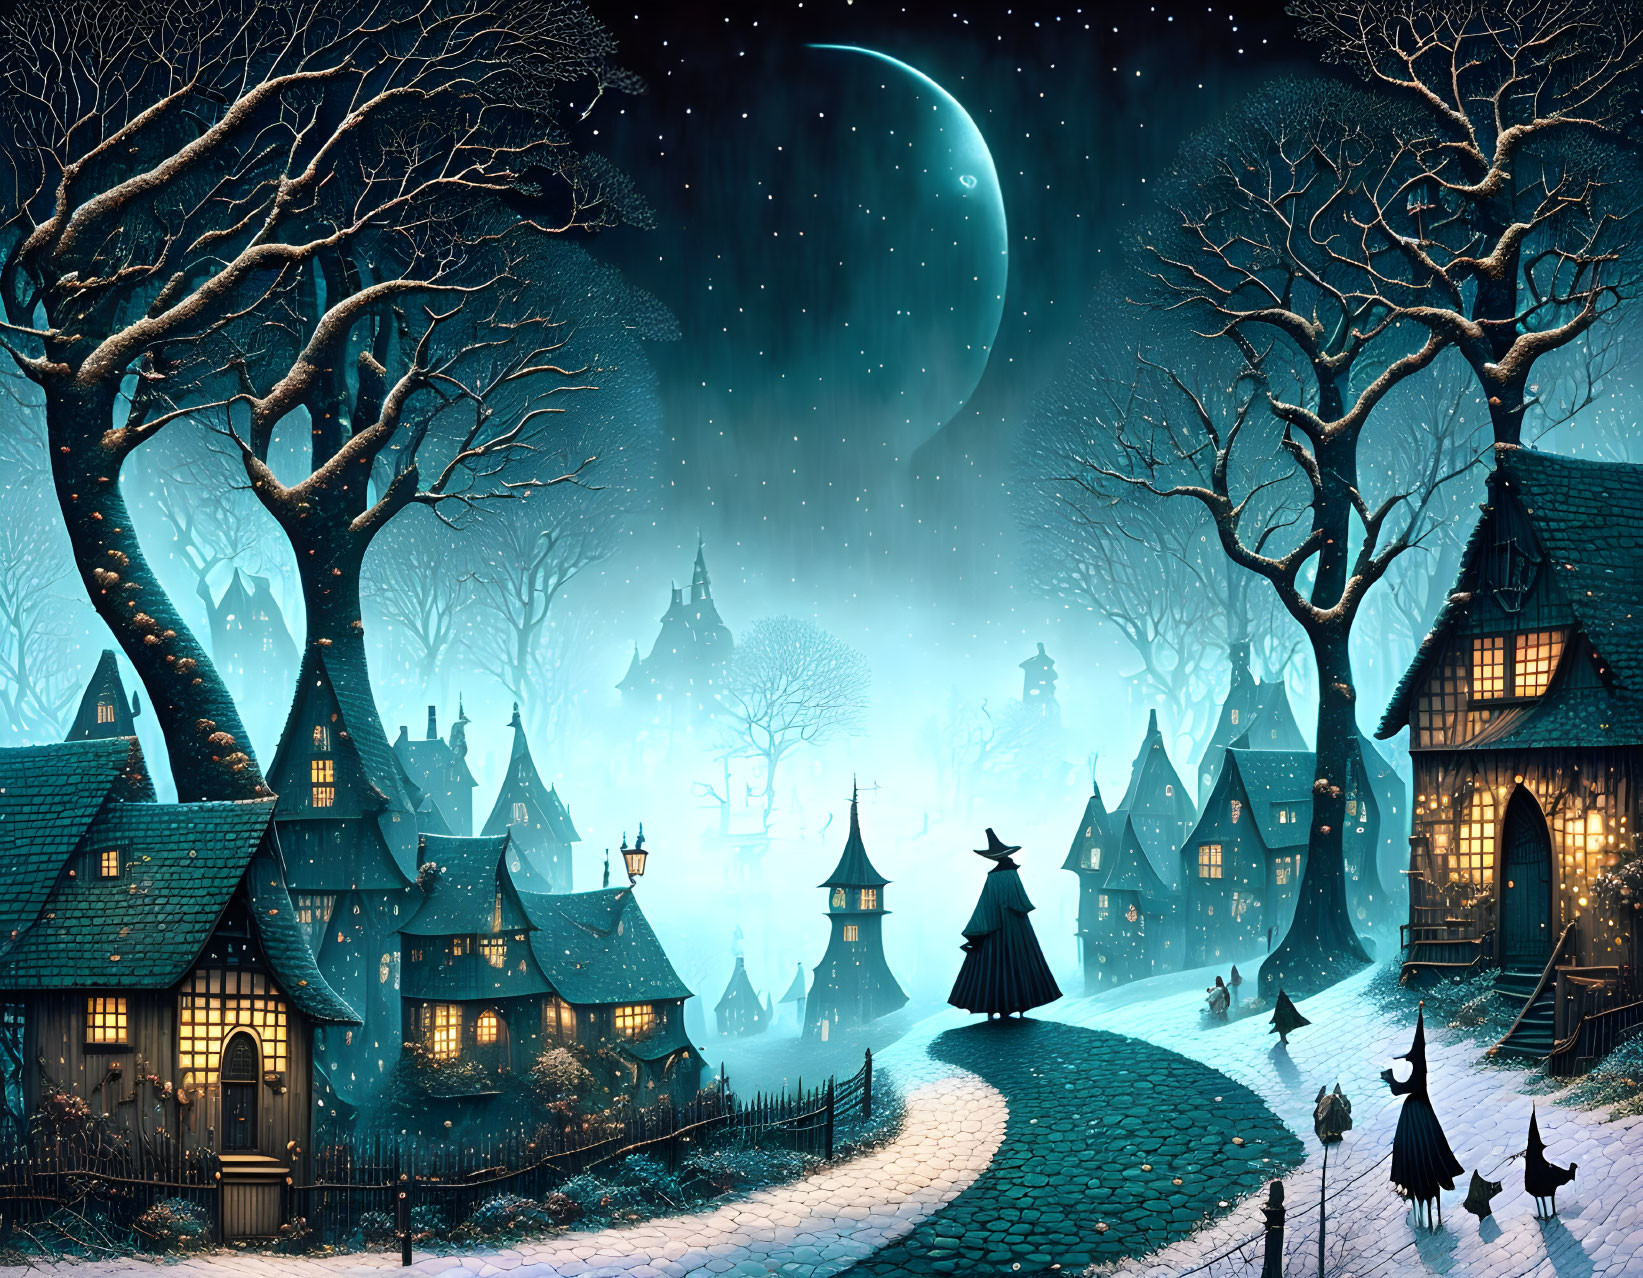 Snow-covered village scene with crescent moon and cloaked figures at night